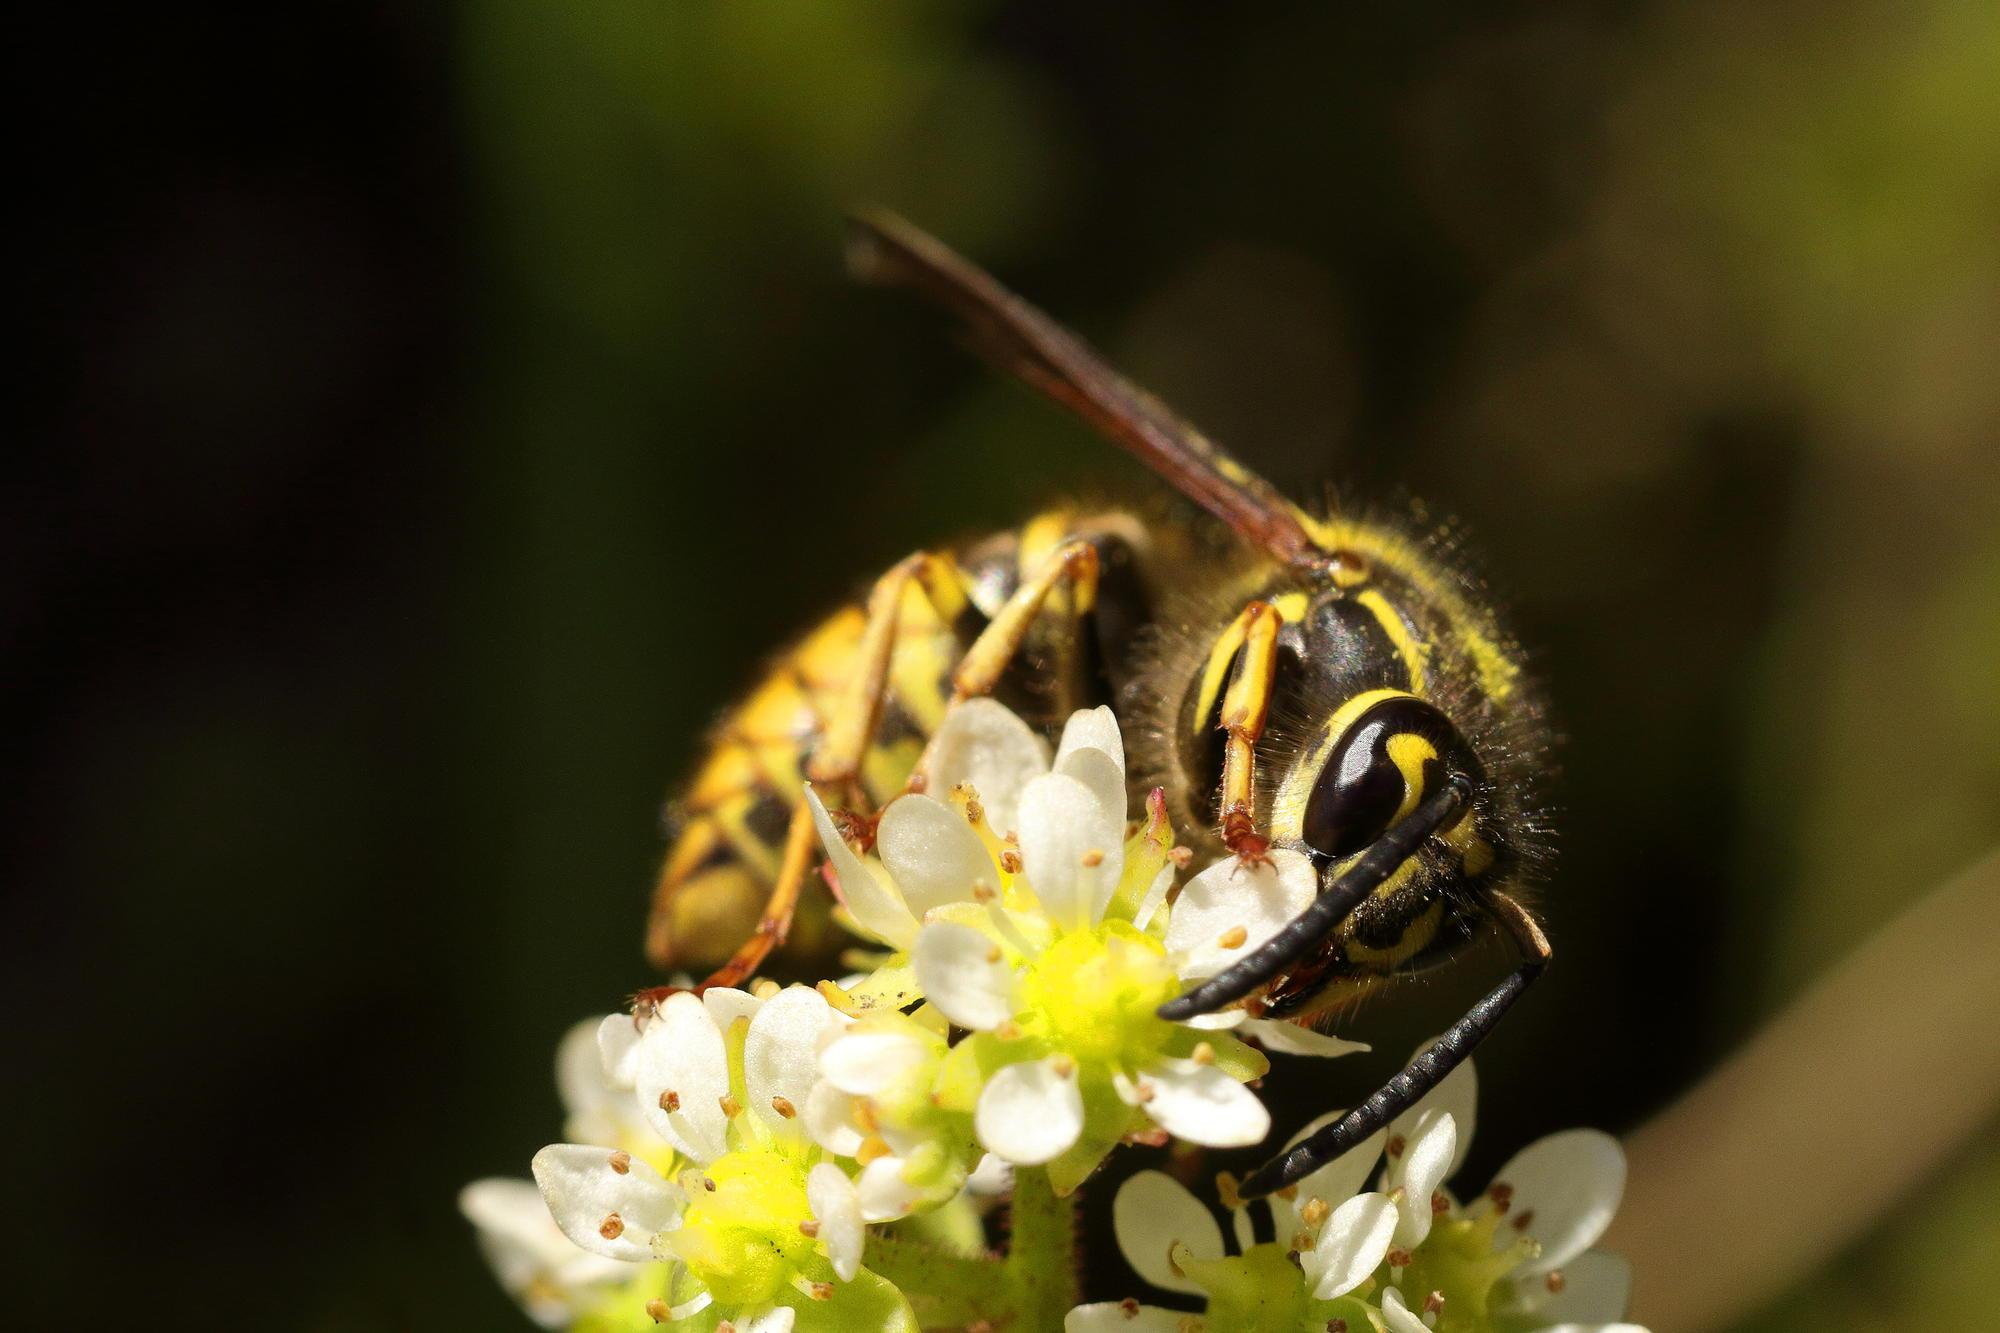 A yelloow and black wasp on a compound yellow and white flower